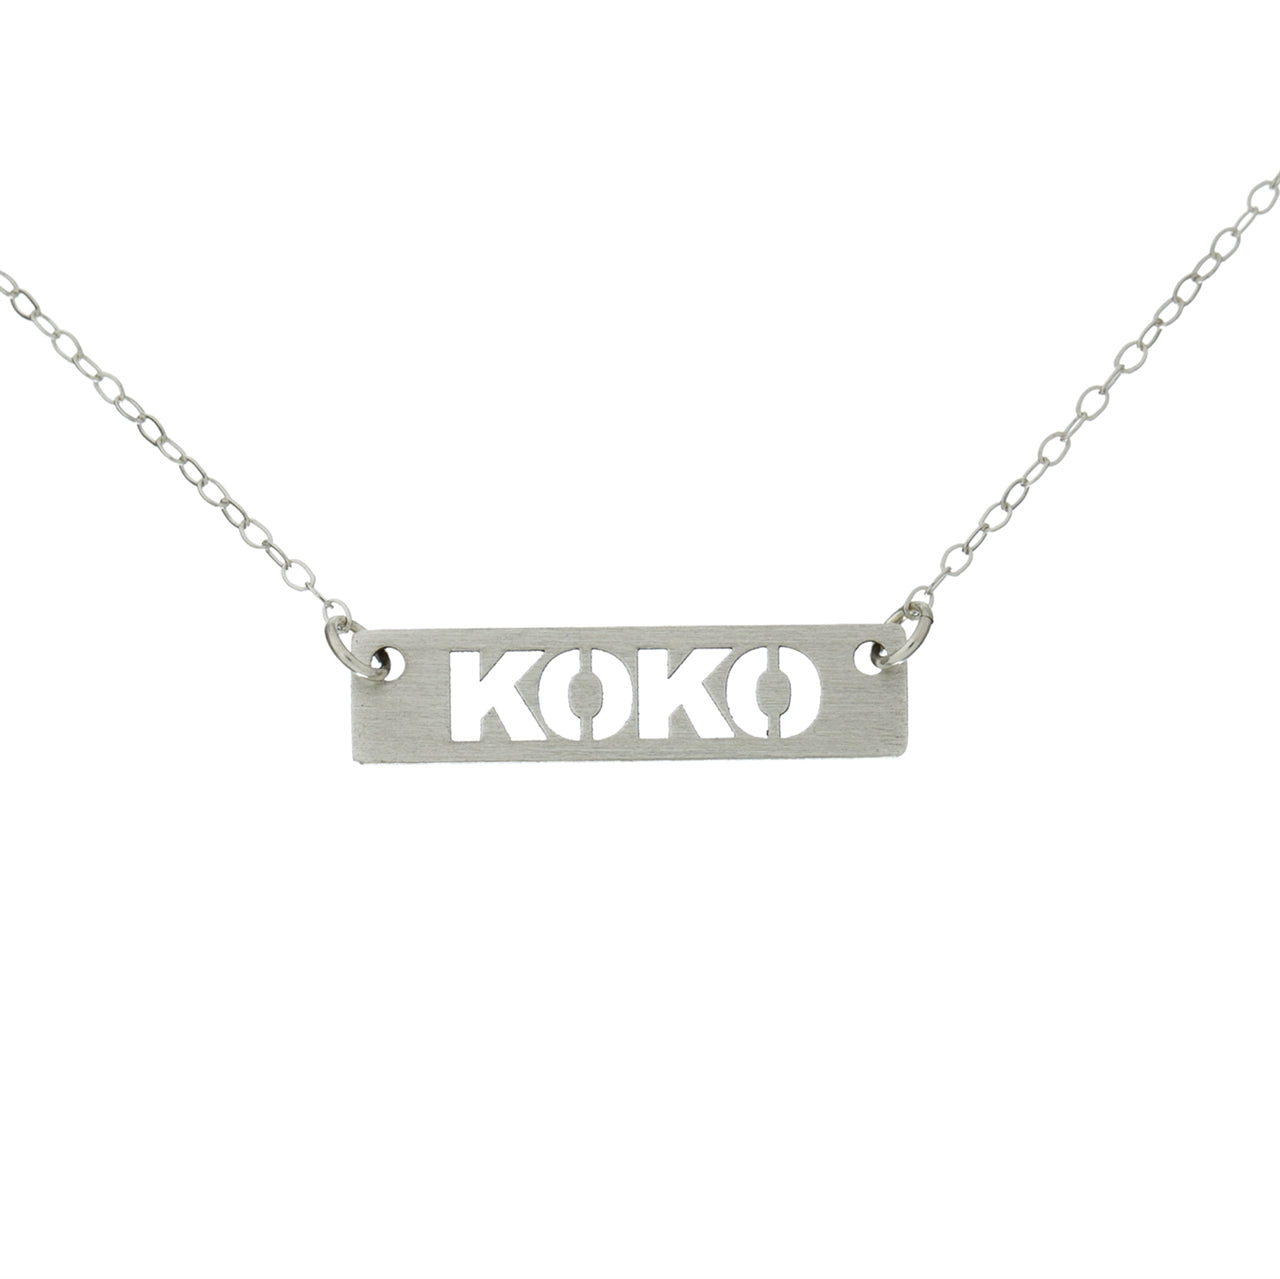 Name Bar Personalized Sterling Silver Necklace